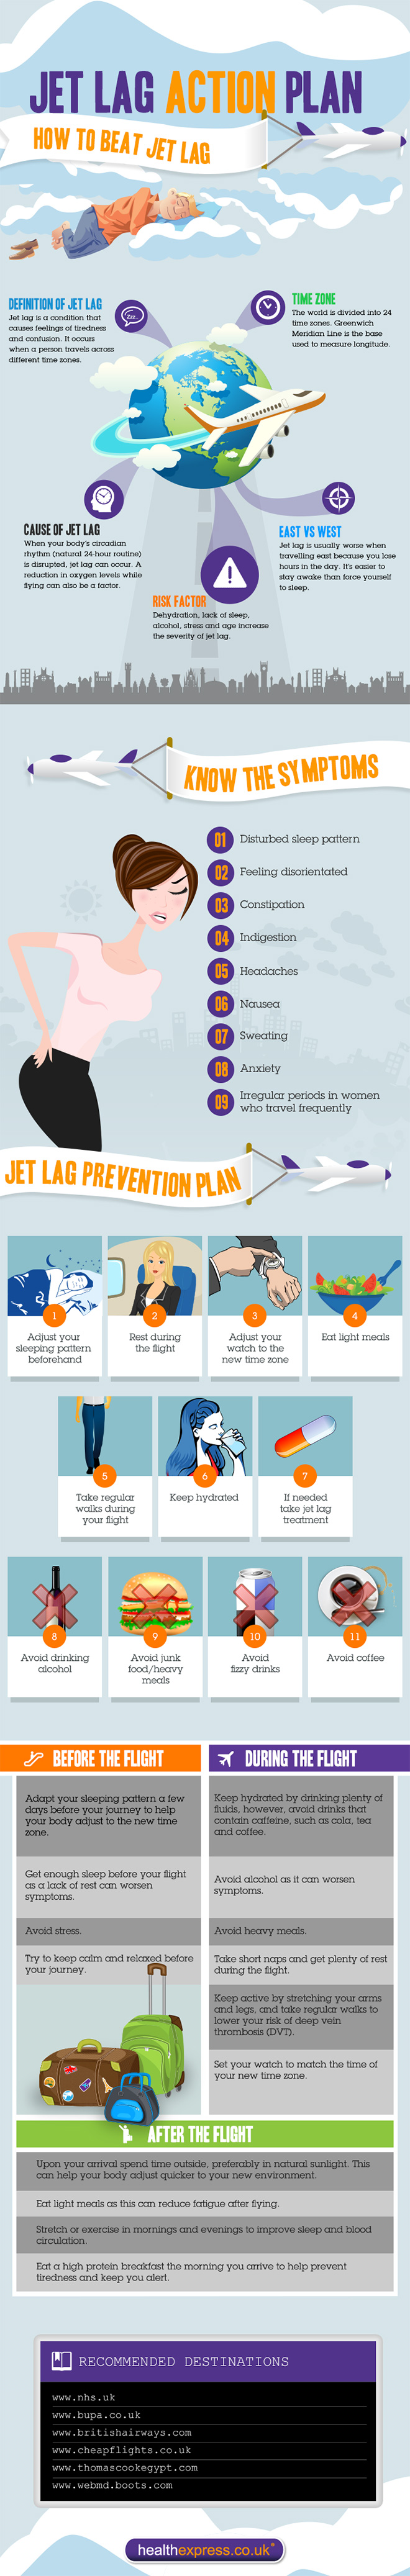 A Guide To Preventing Jet Lag